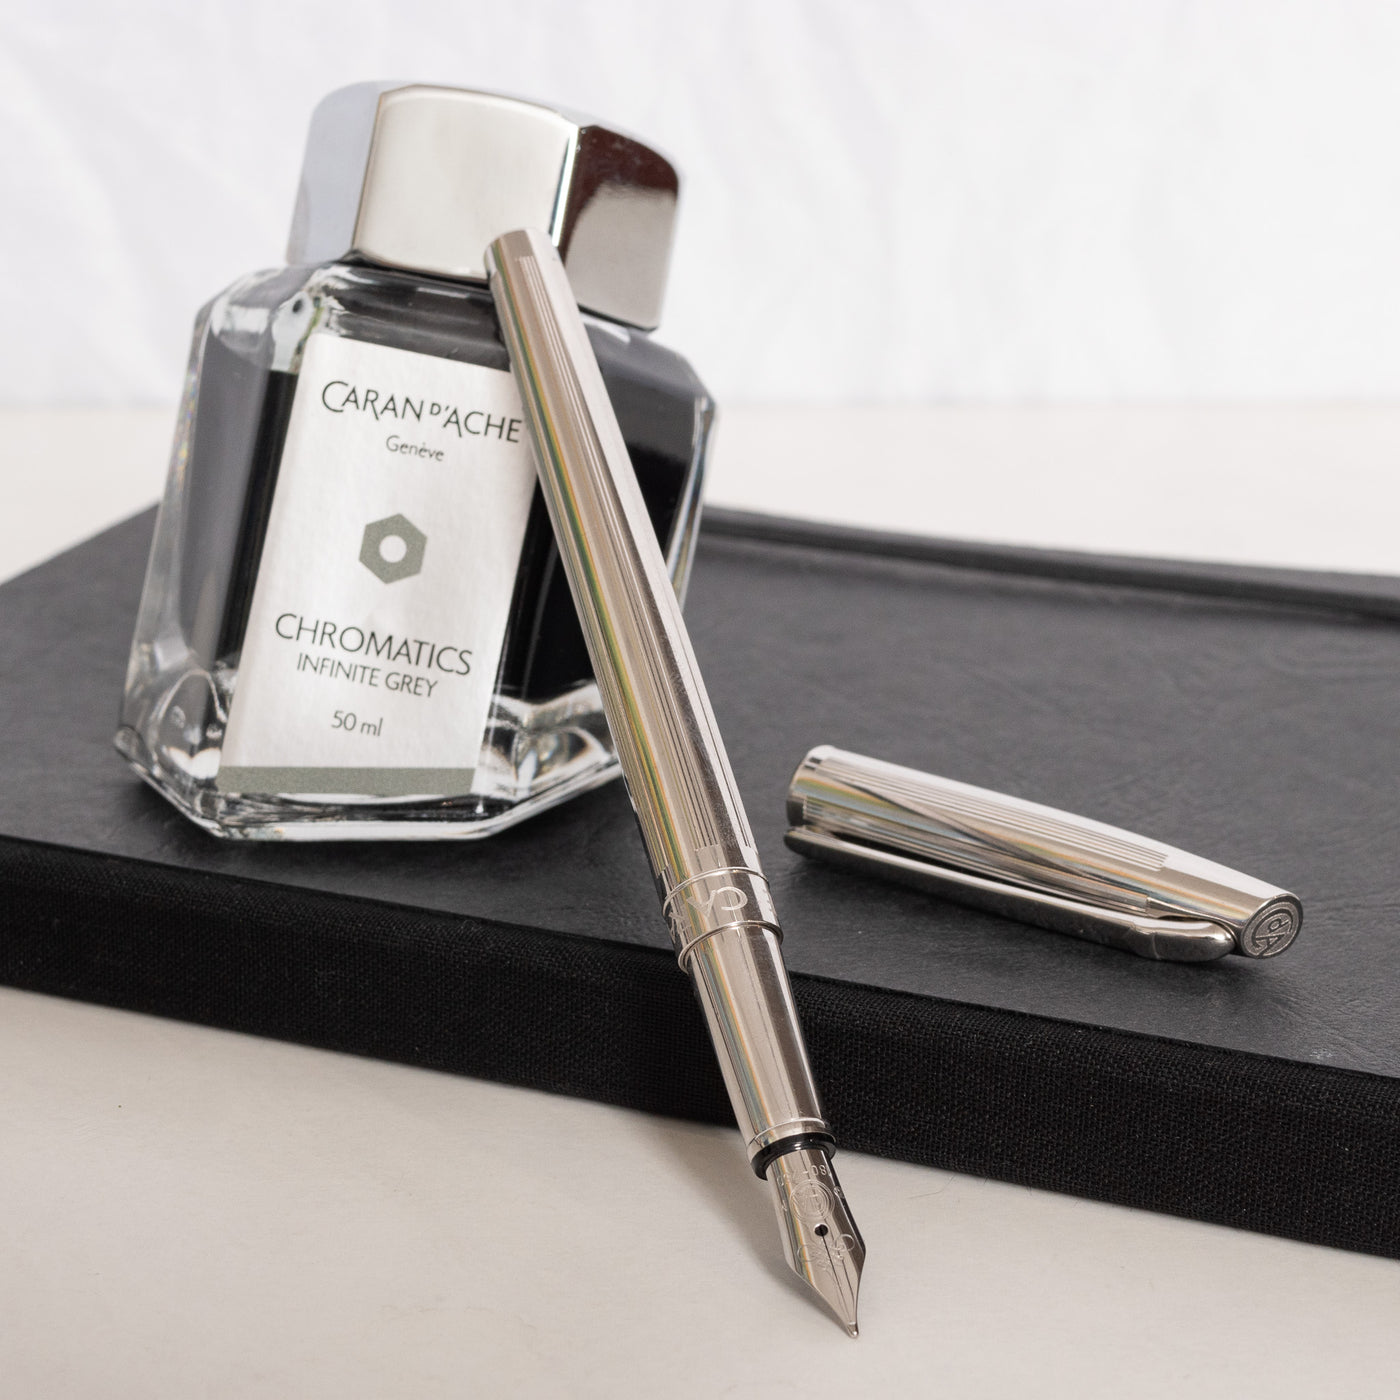 Caran d'Ache Madison Cisele Silver Rhodium Coated Fountain Pen - Preowned Uncapped